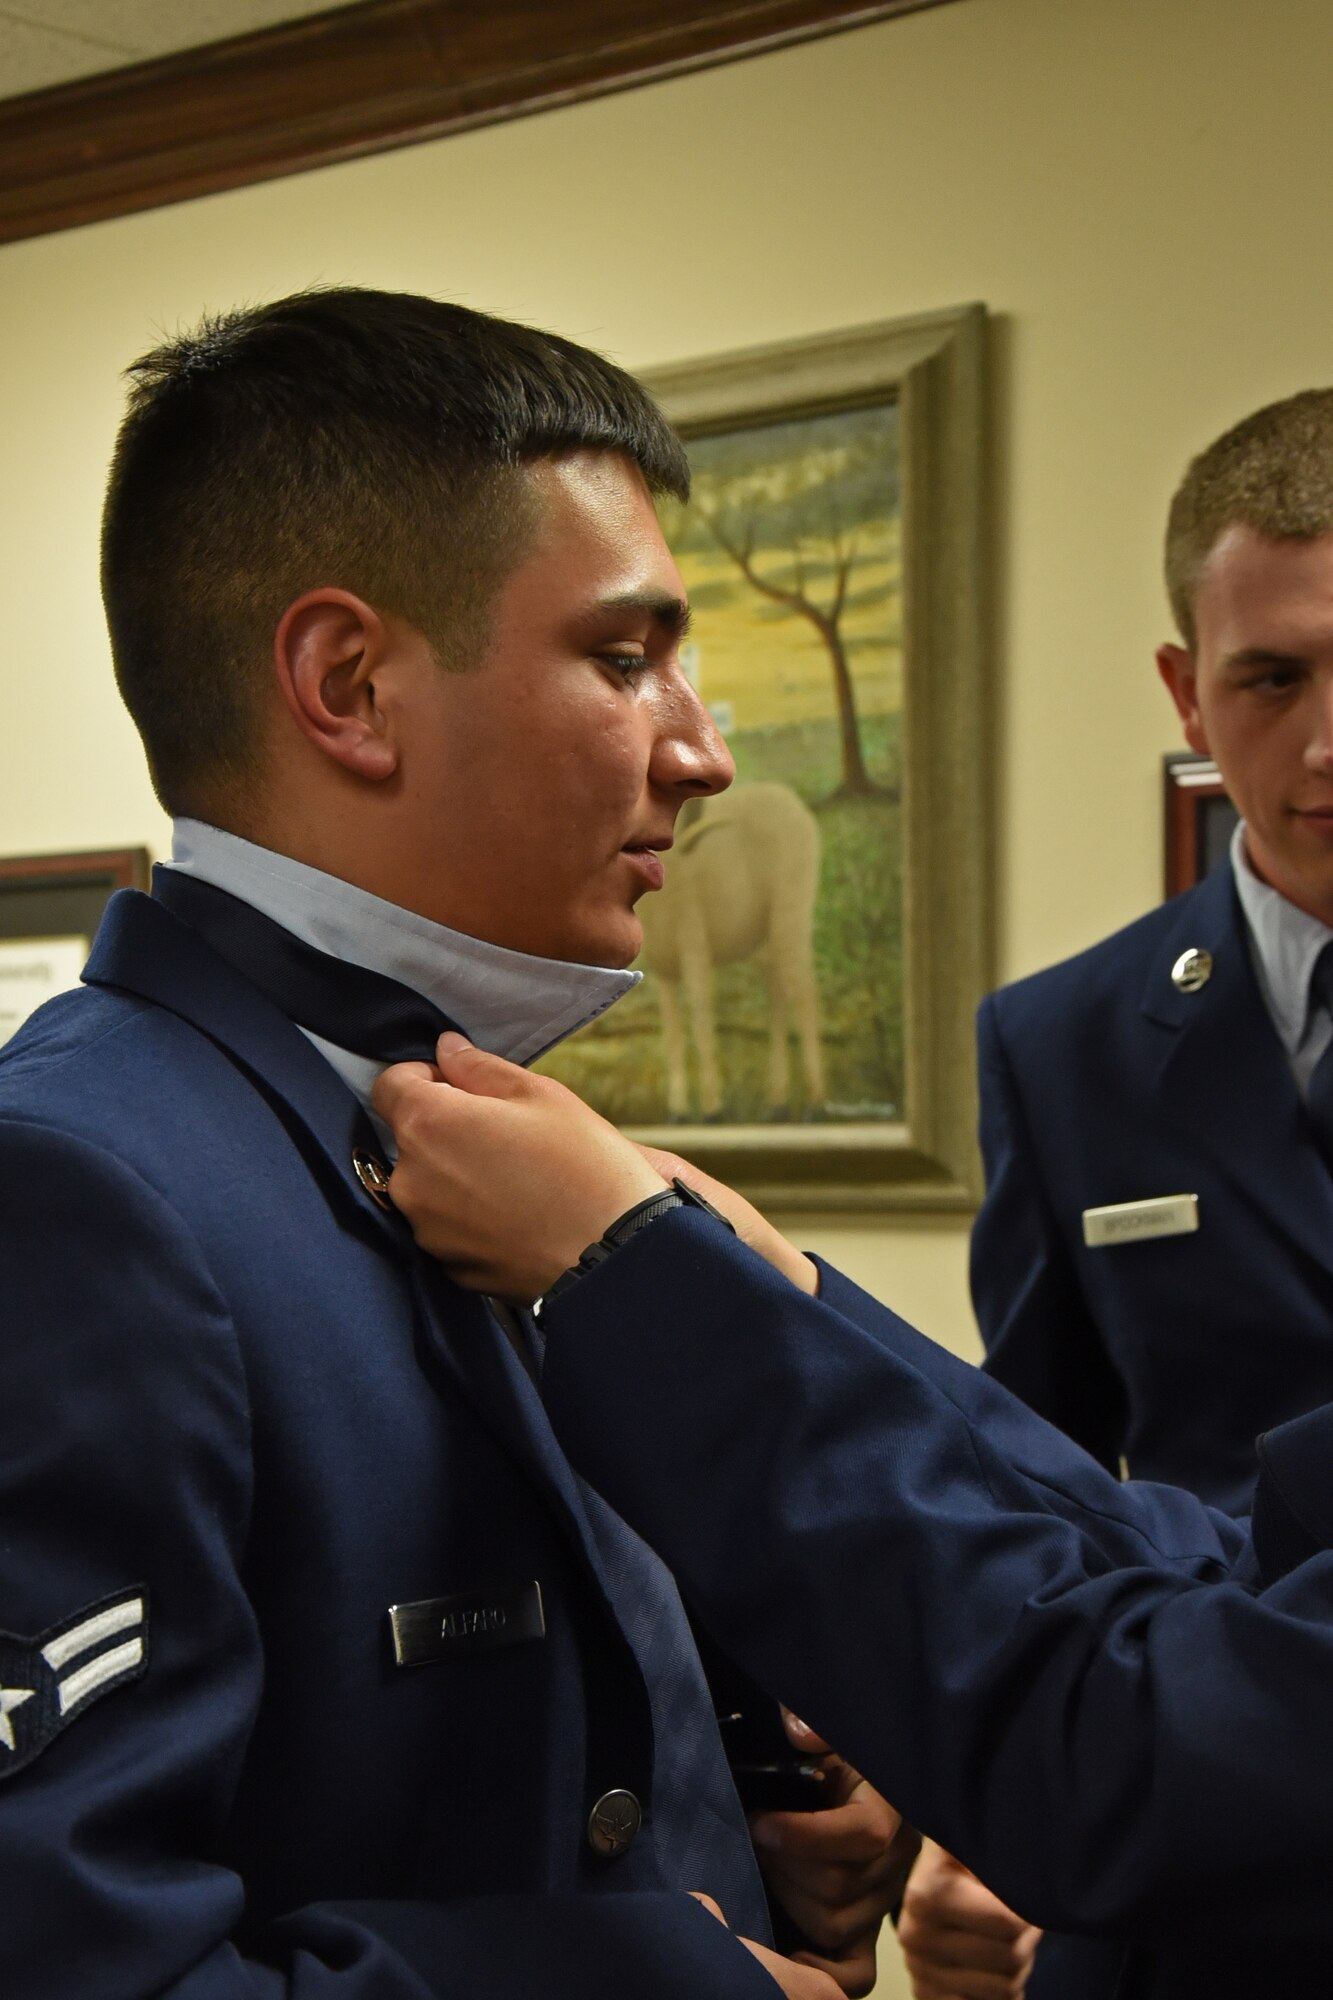 U.S. Air Force Airman 1st Class Syrus Alfaro, 315th Training Squadron student, one of 50 student volunteers, has his tie fixed while preparing for the Military Appreciation Day at Angelo State University’s LeGrande Stadium in San Angelo, Texas, Sept. 9, 2017. Alfaro and the other volunteers held flags from each U.S. state during the Oath of Enlistment during the halftime ceremony.  (U.S. Air Force photo by Airman Zachary Chapman/Released)